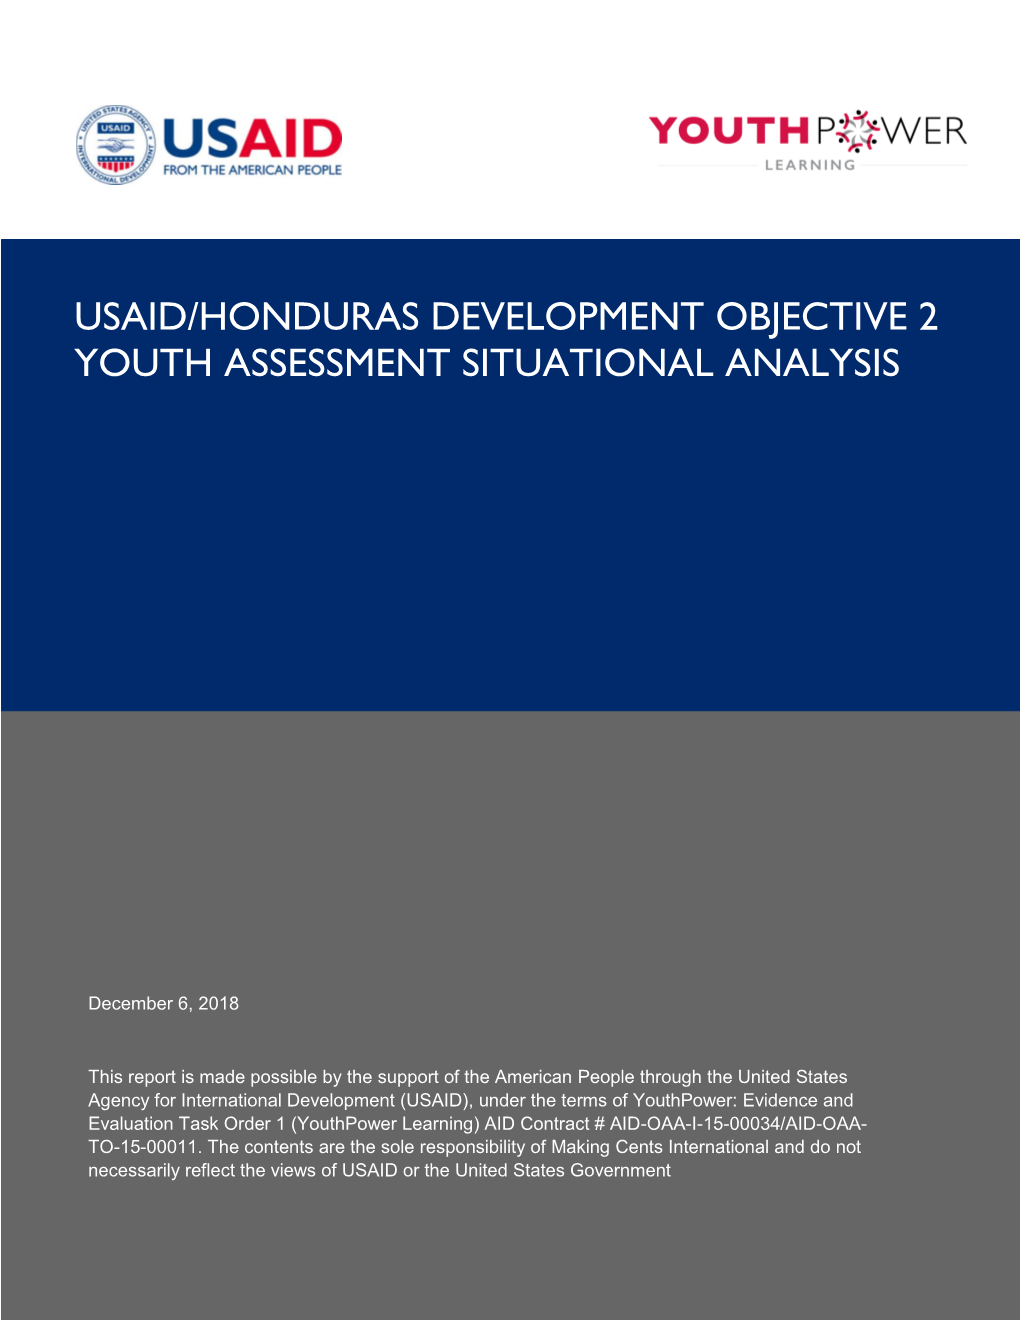 Usaid/Honduras Development Objective 2 Youth Assessment Situational Analysis